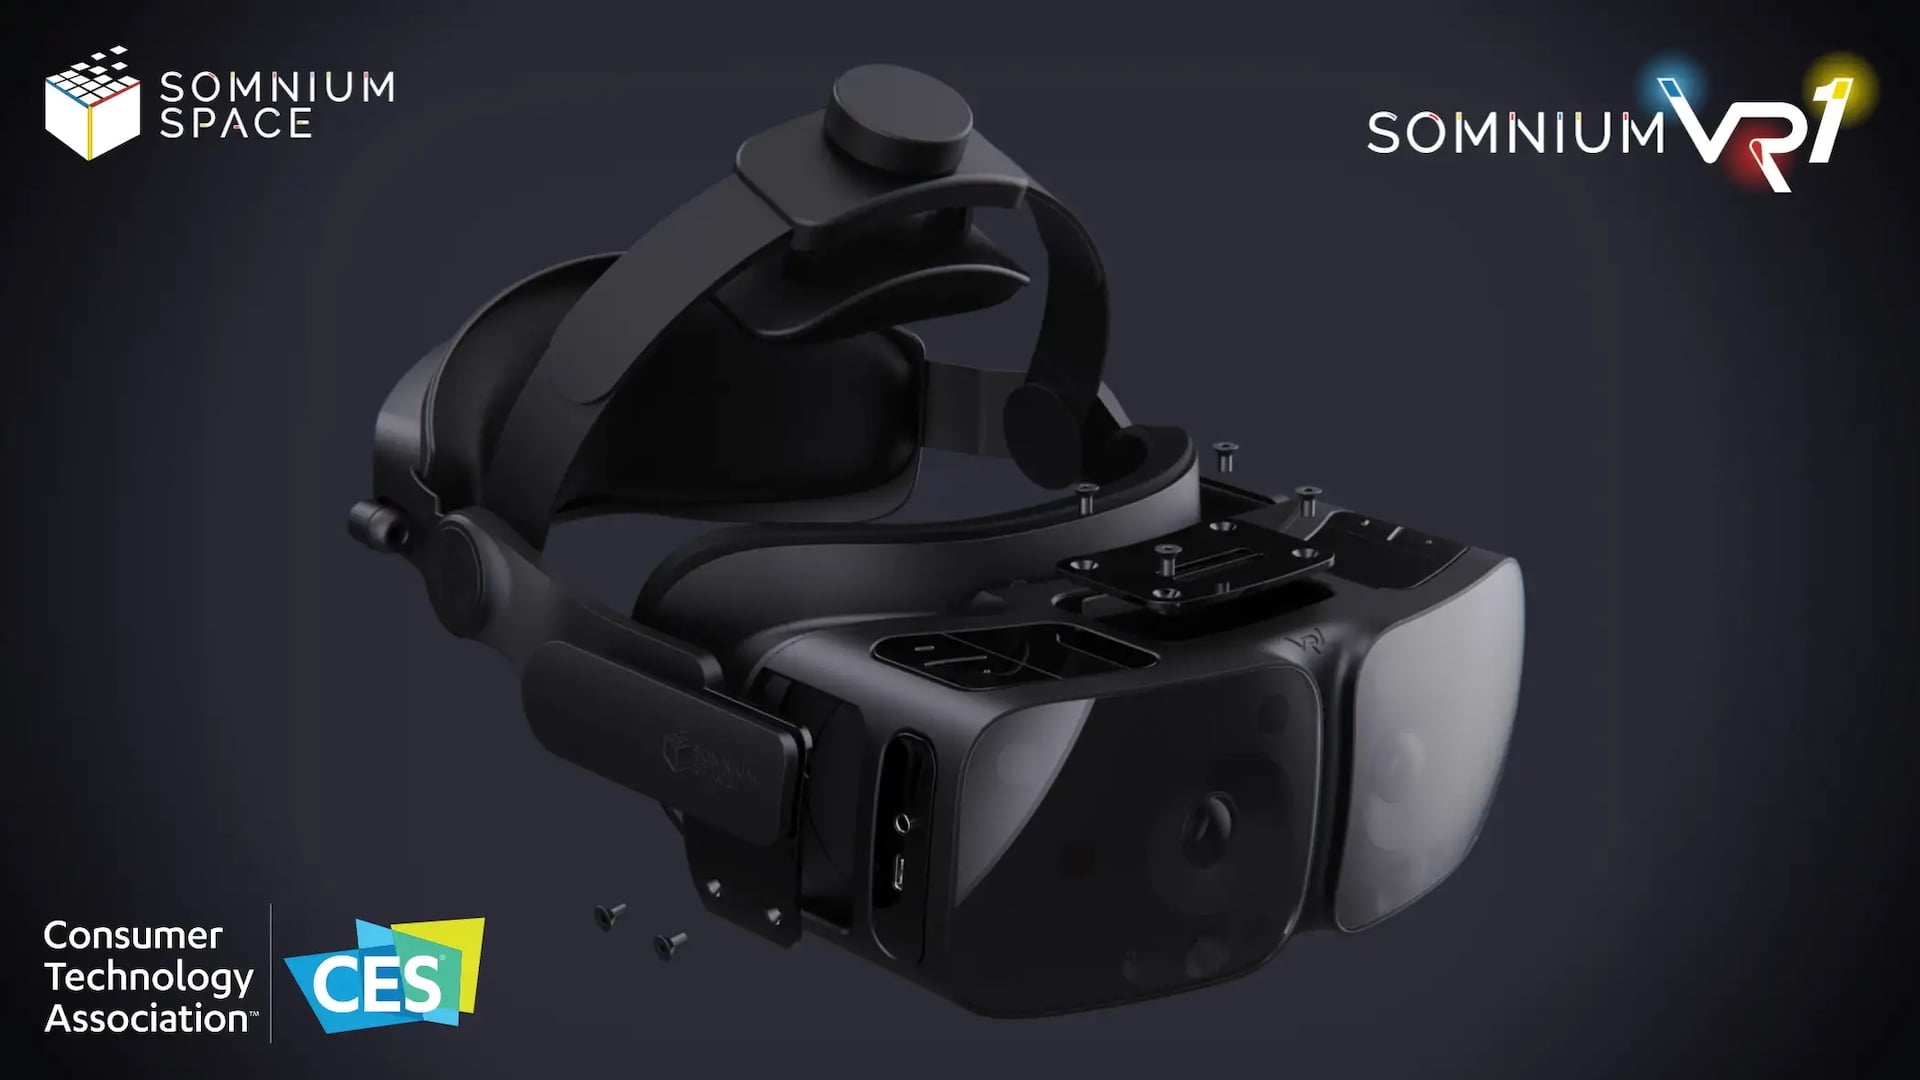 Somnium VR1 high-end PC VR headset to be shown at CES 2023